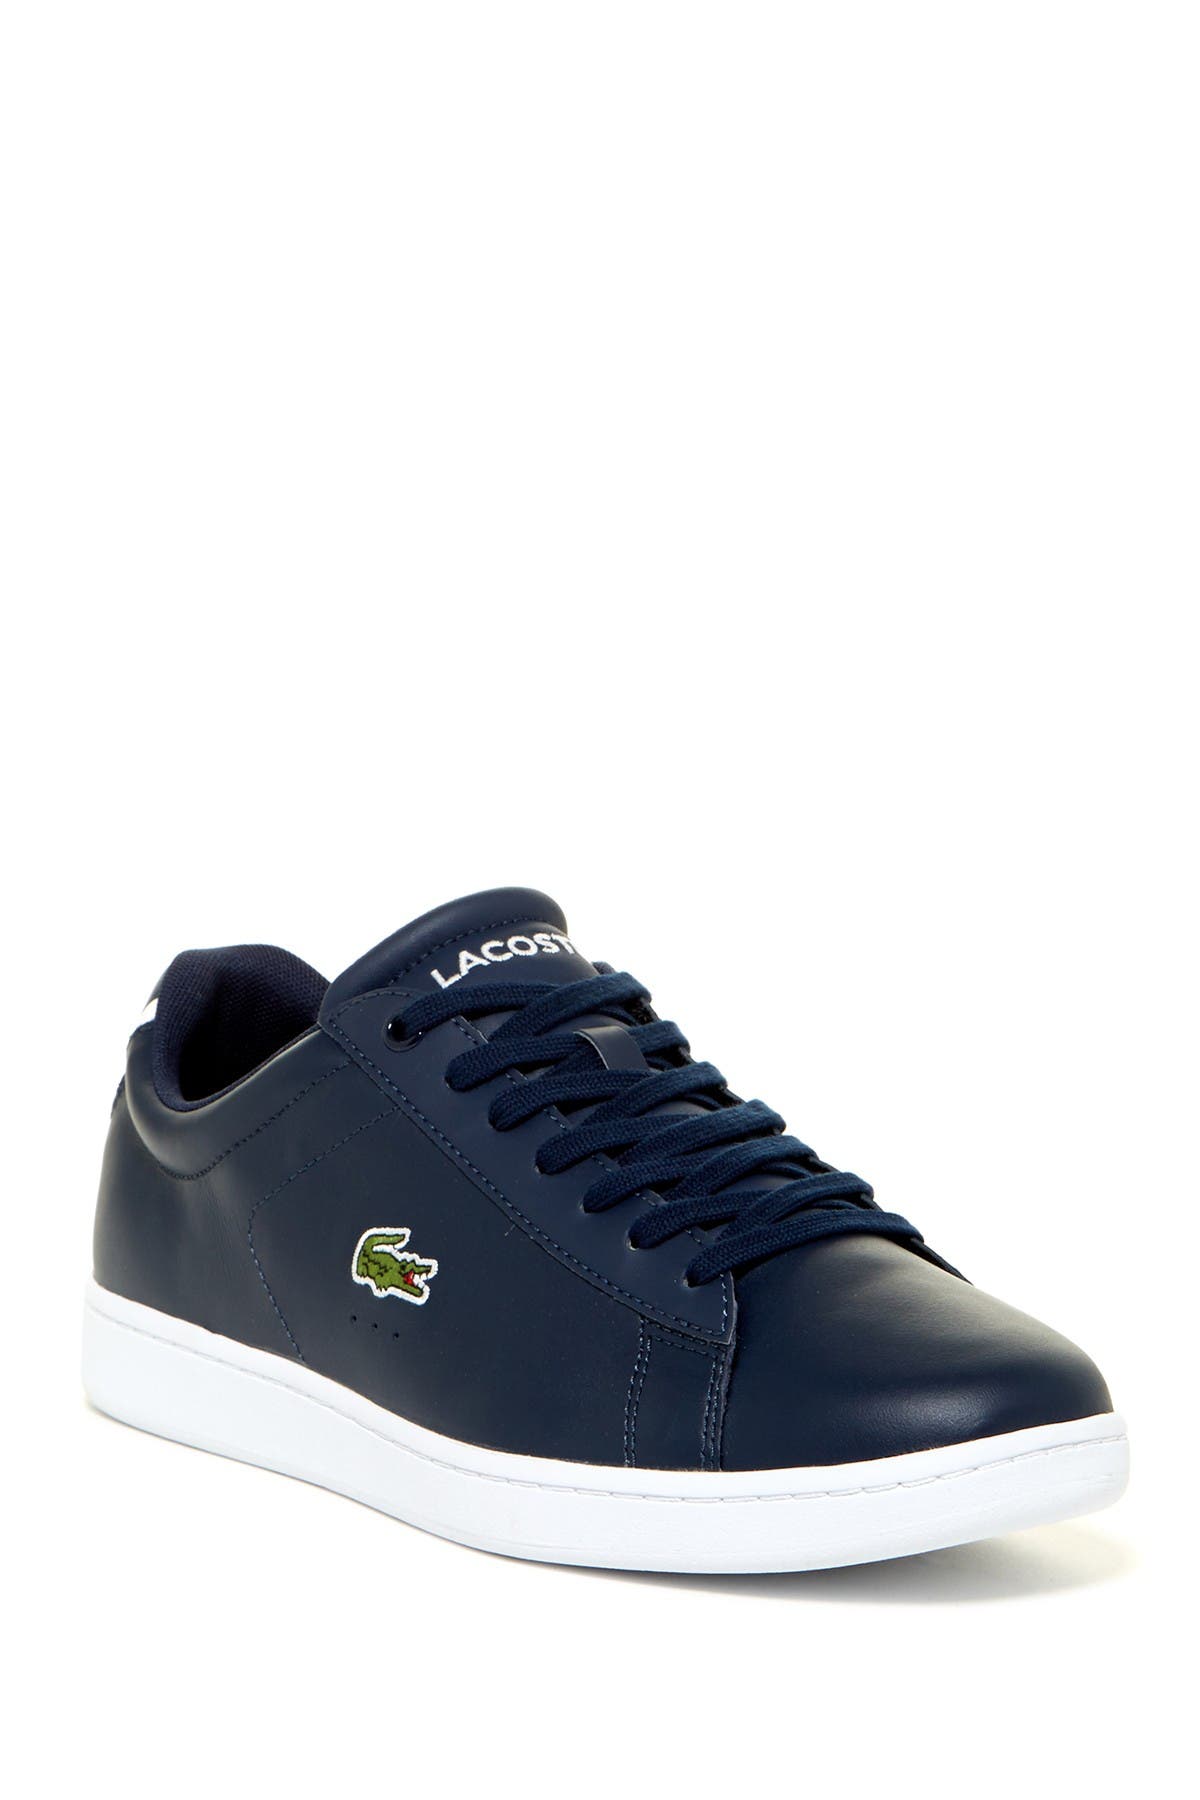 women's carnaby evo bl leather trainers